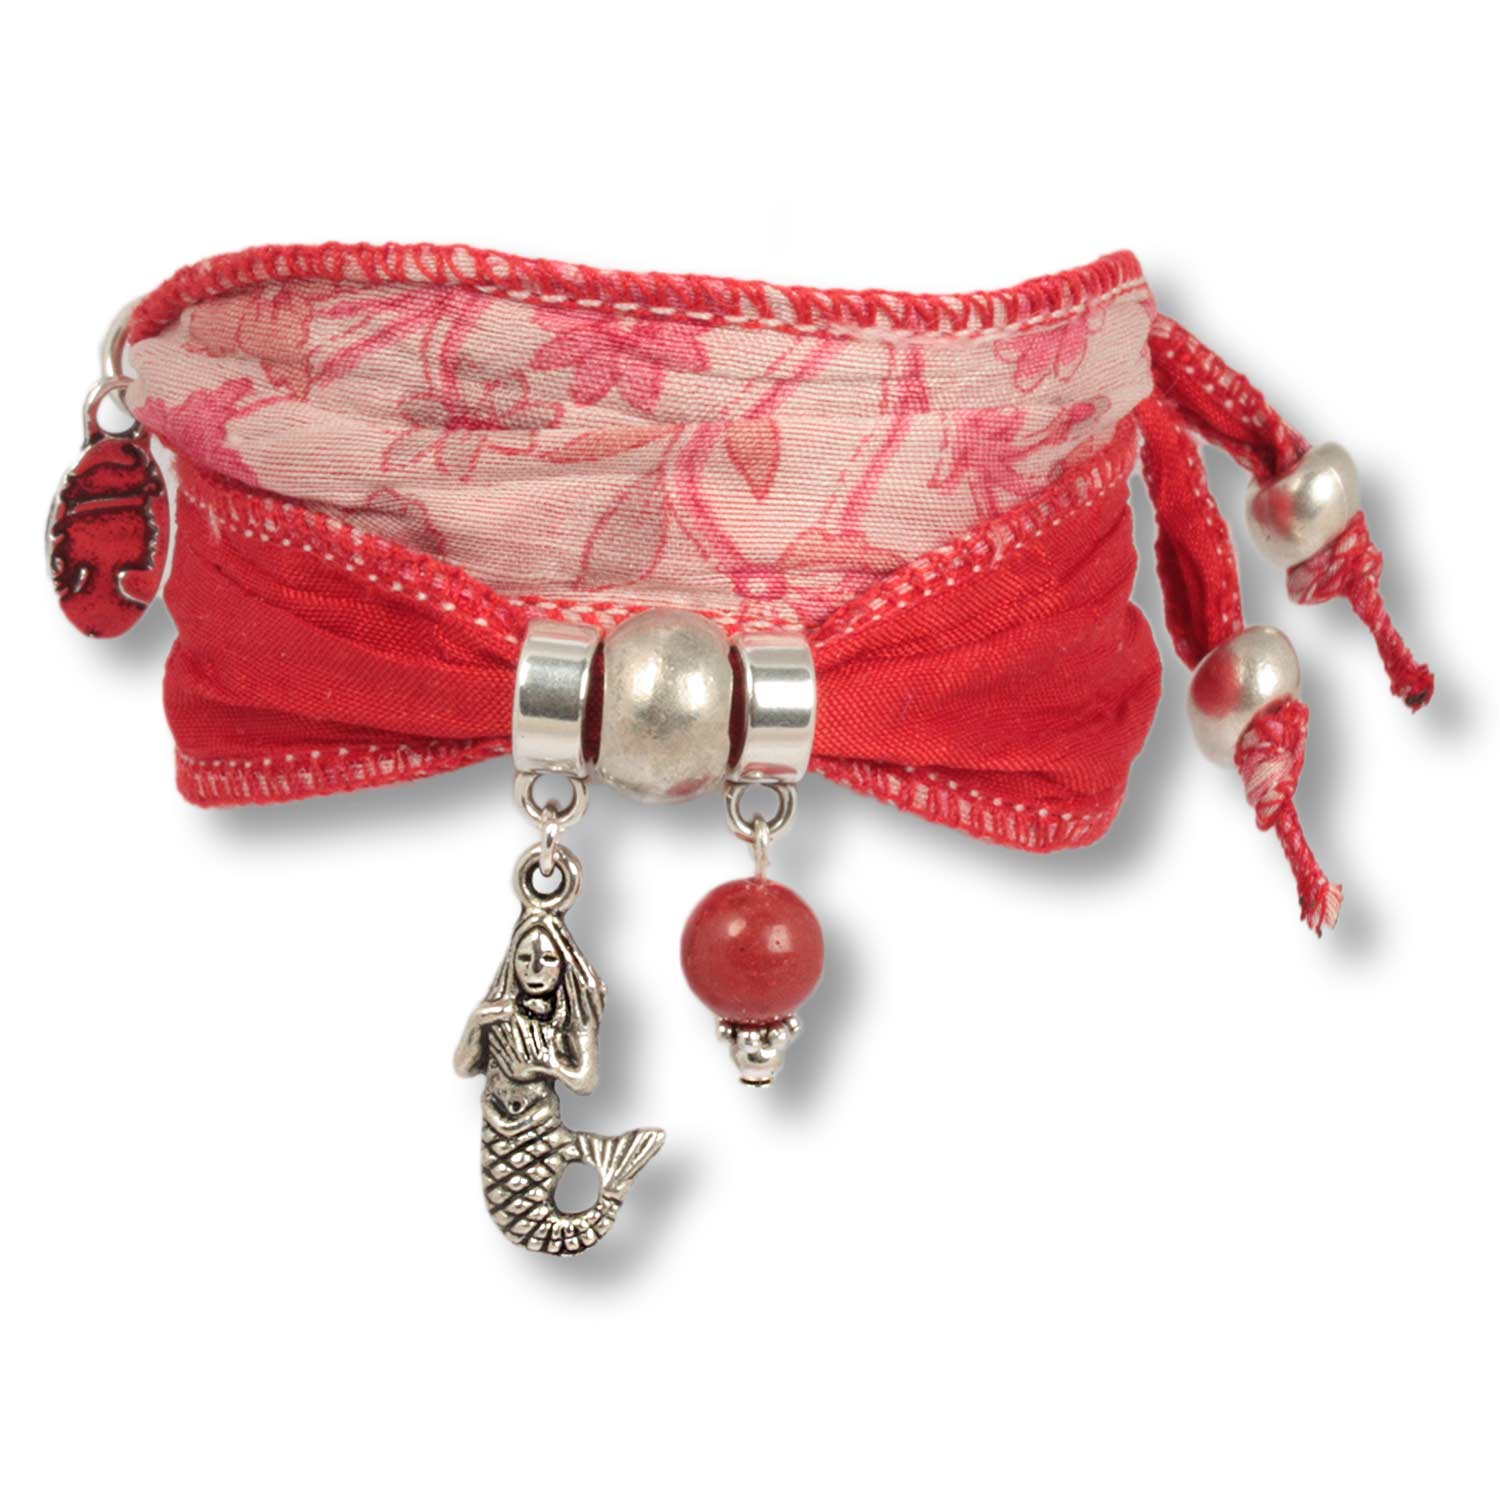 Red Coral - Ocean Daughters luck bracelet from indian saris with coral